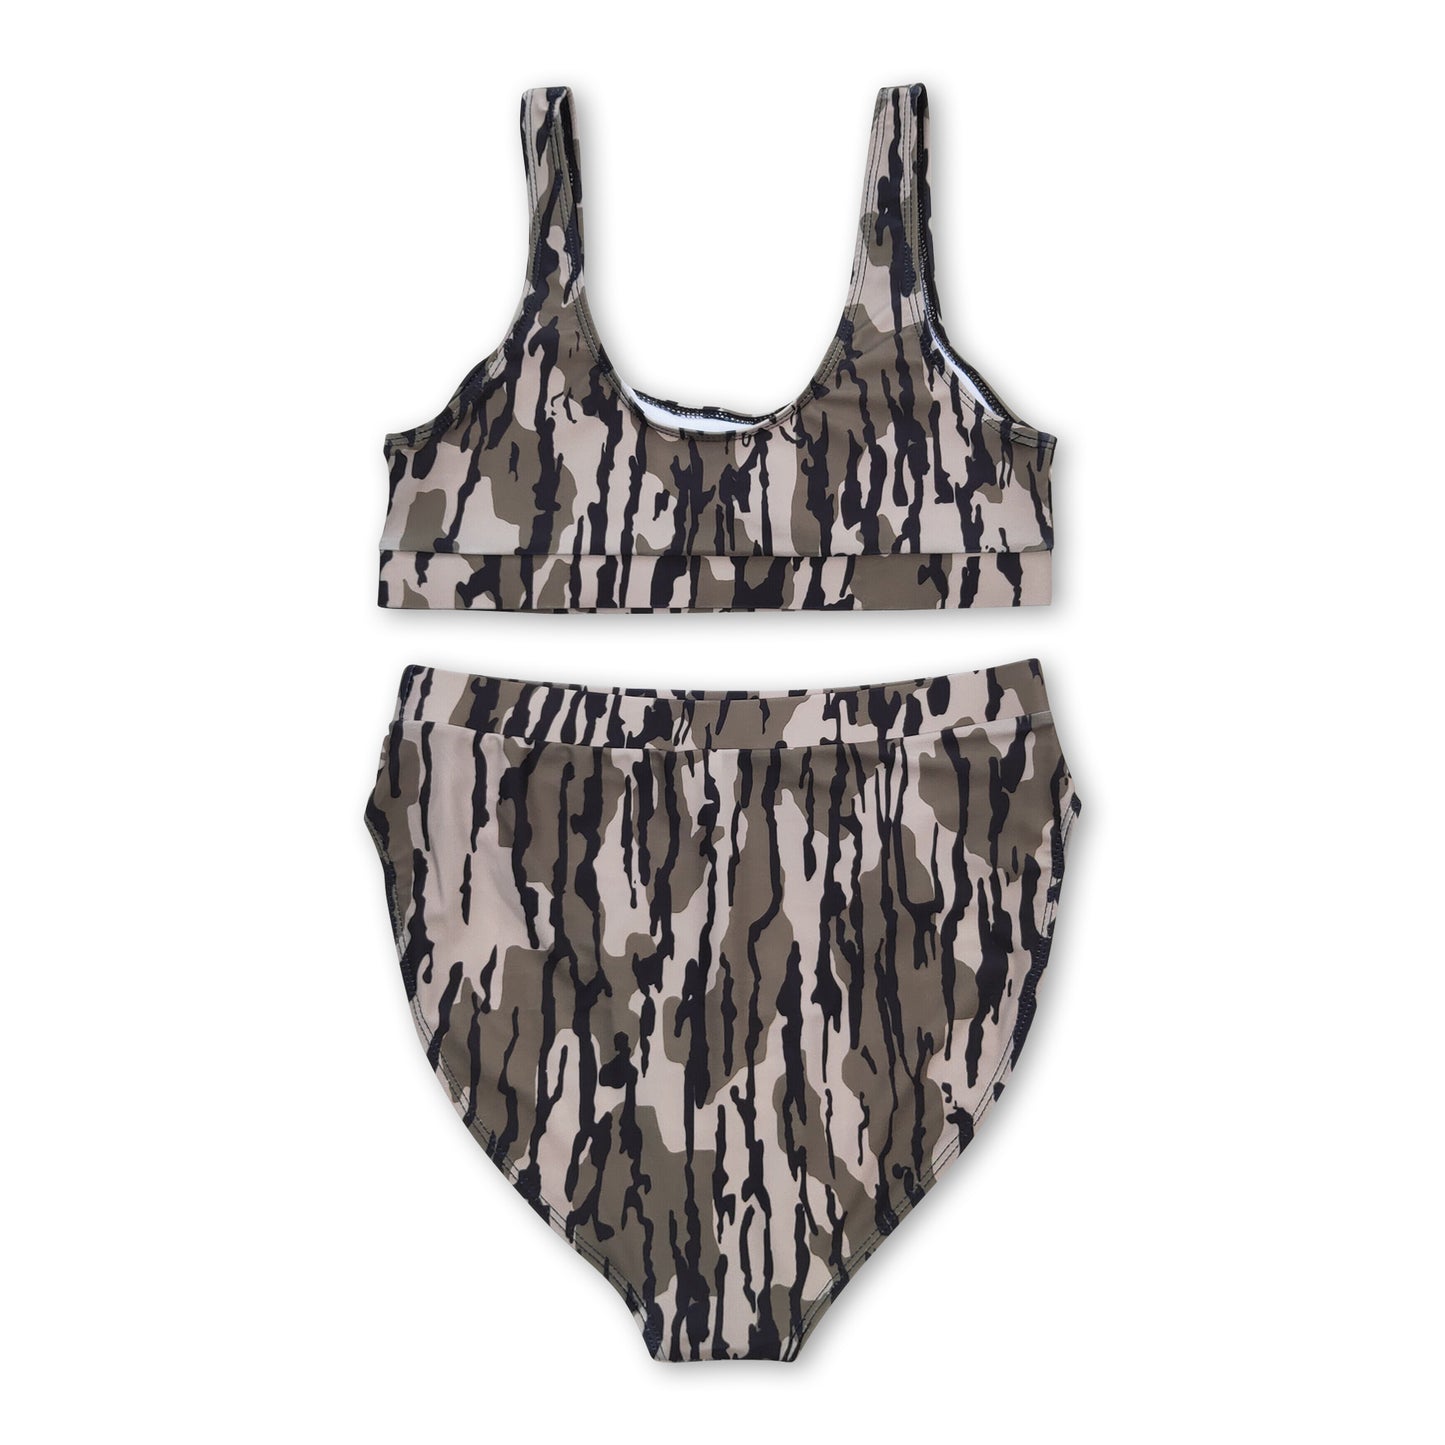 Bottomland print mommy and me women summer swimsuit